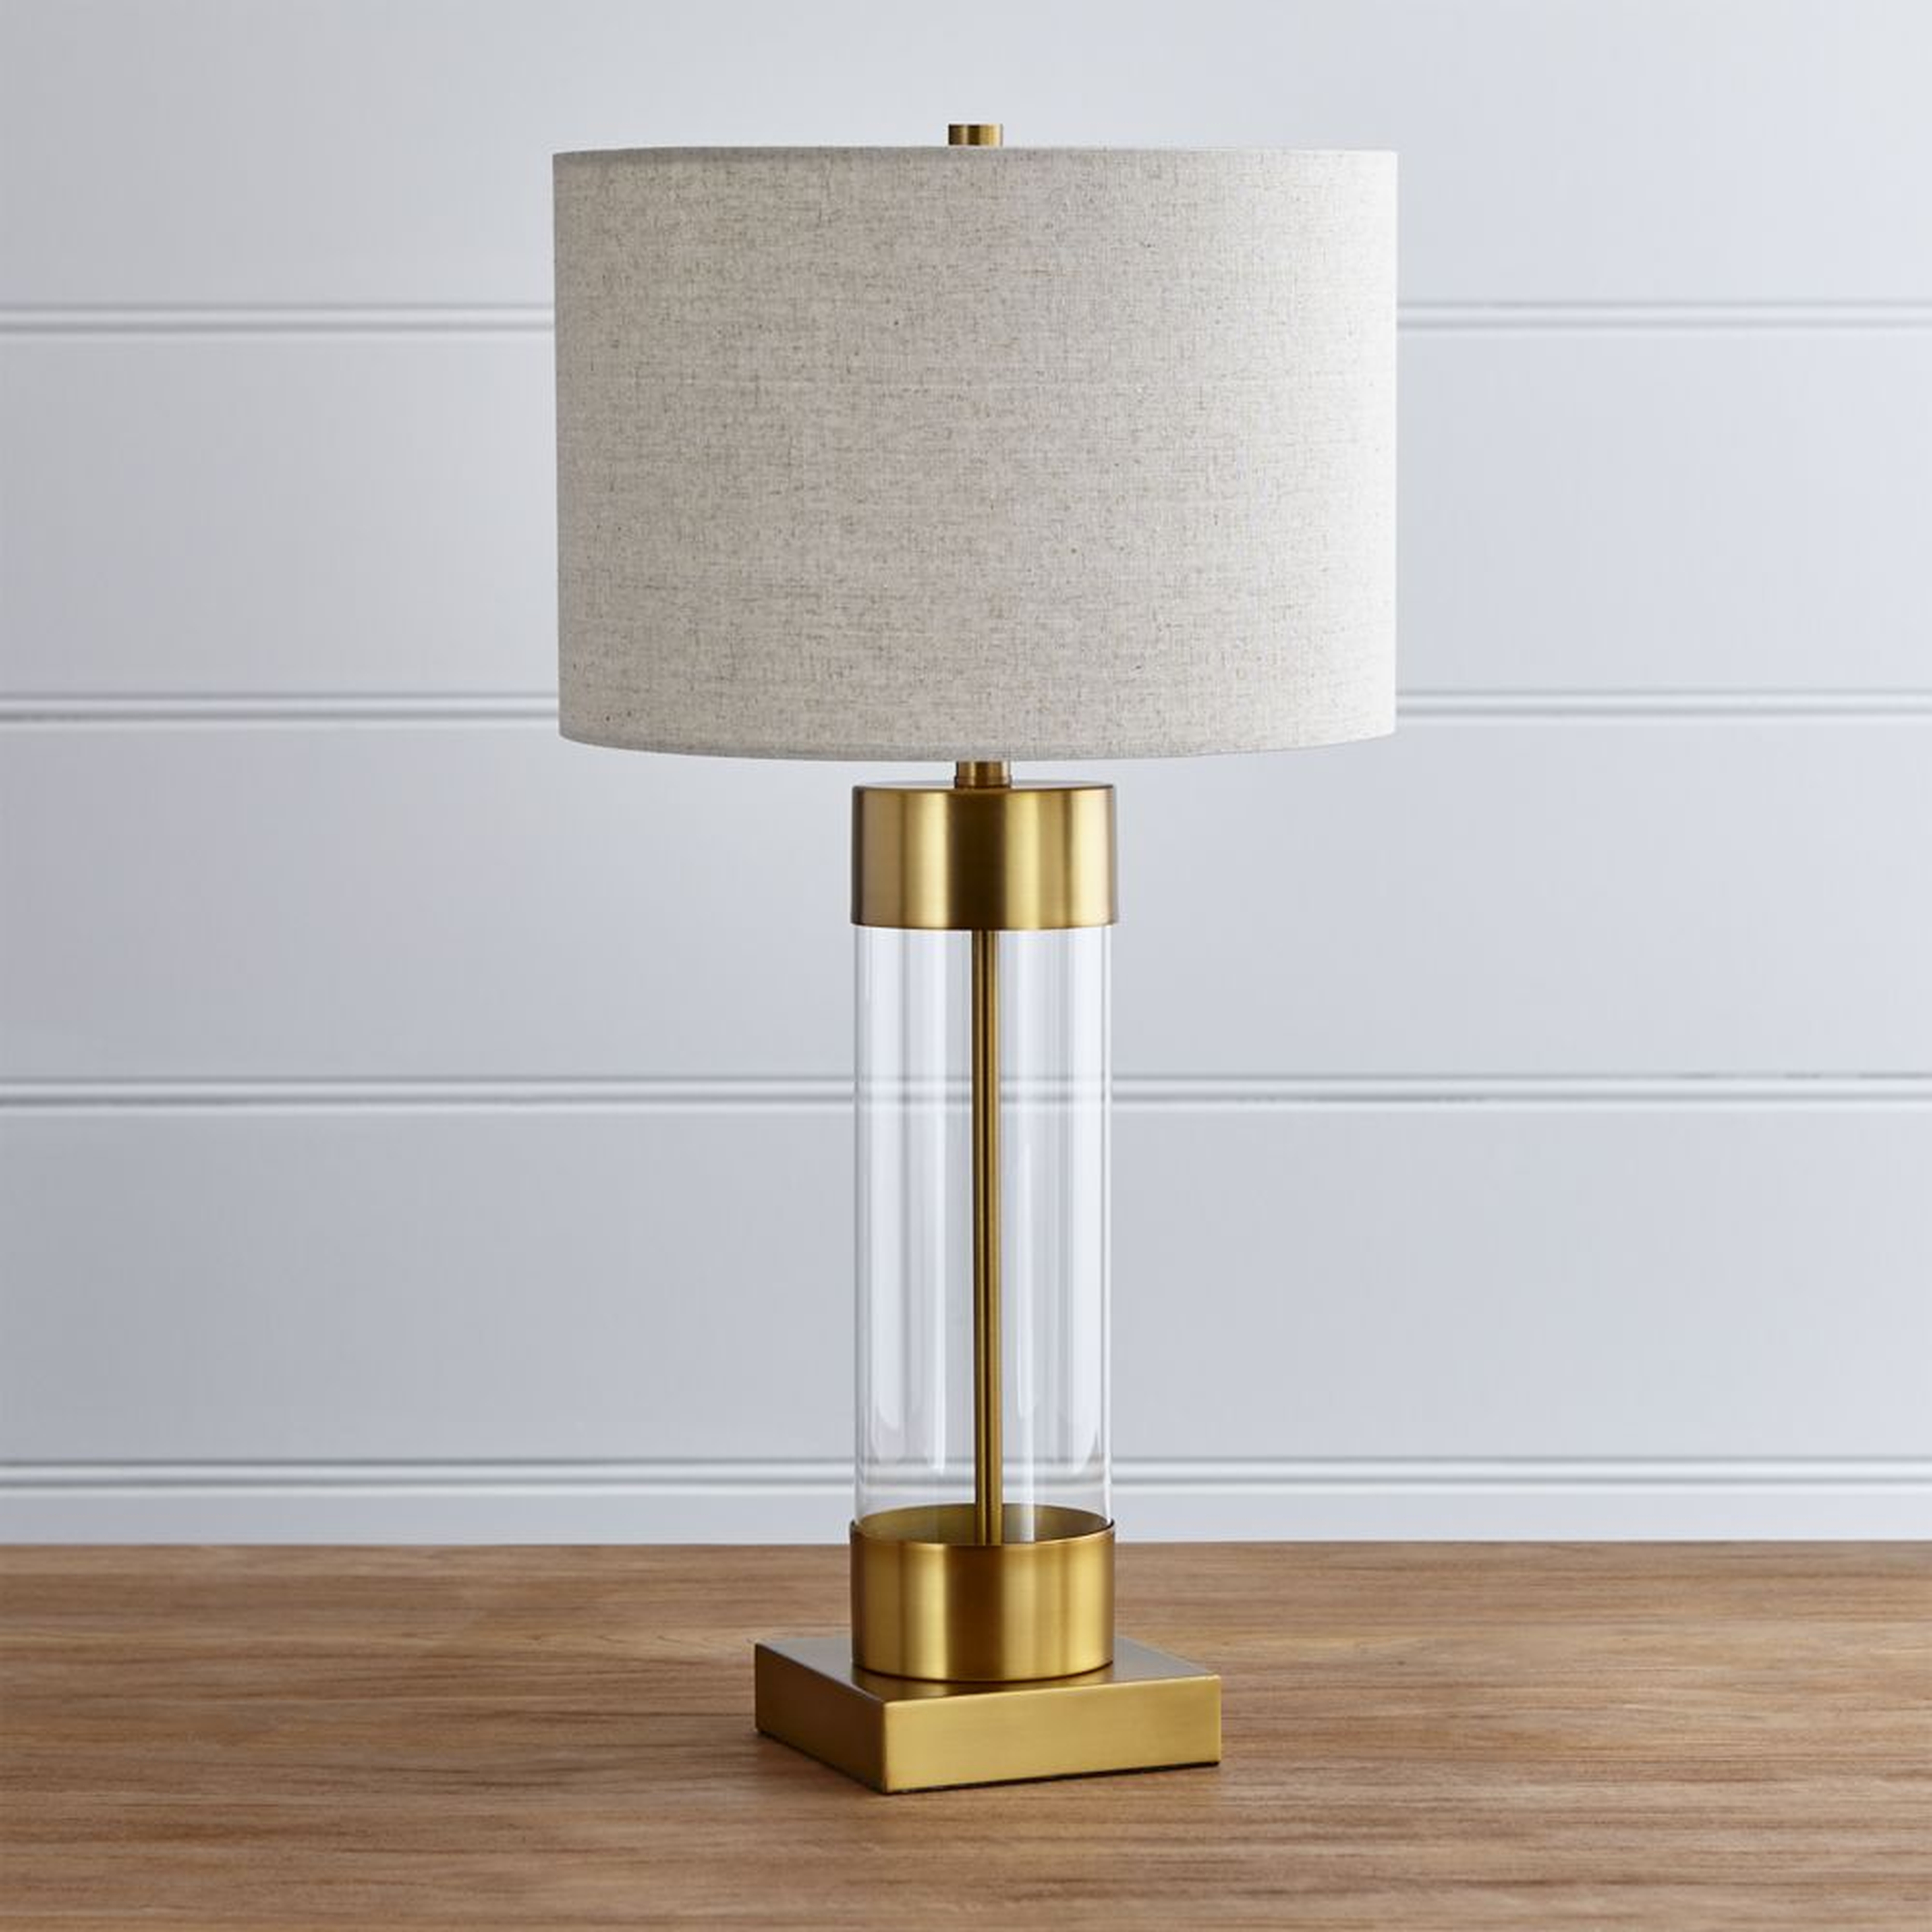 Avenue Brass Table Lamp with USB Port, Set of 2 - Crate and Barrel